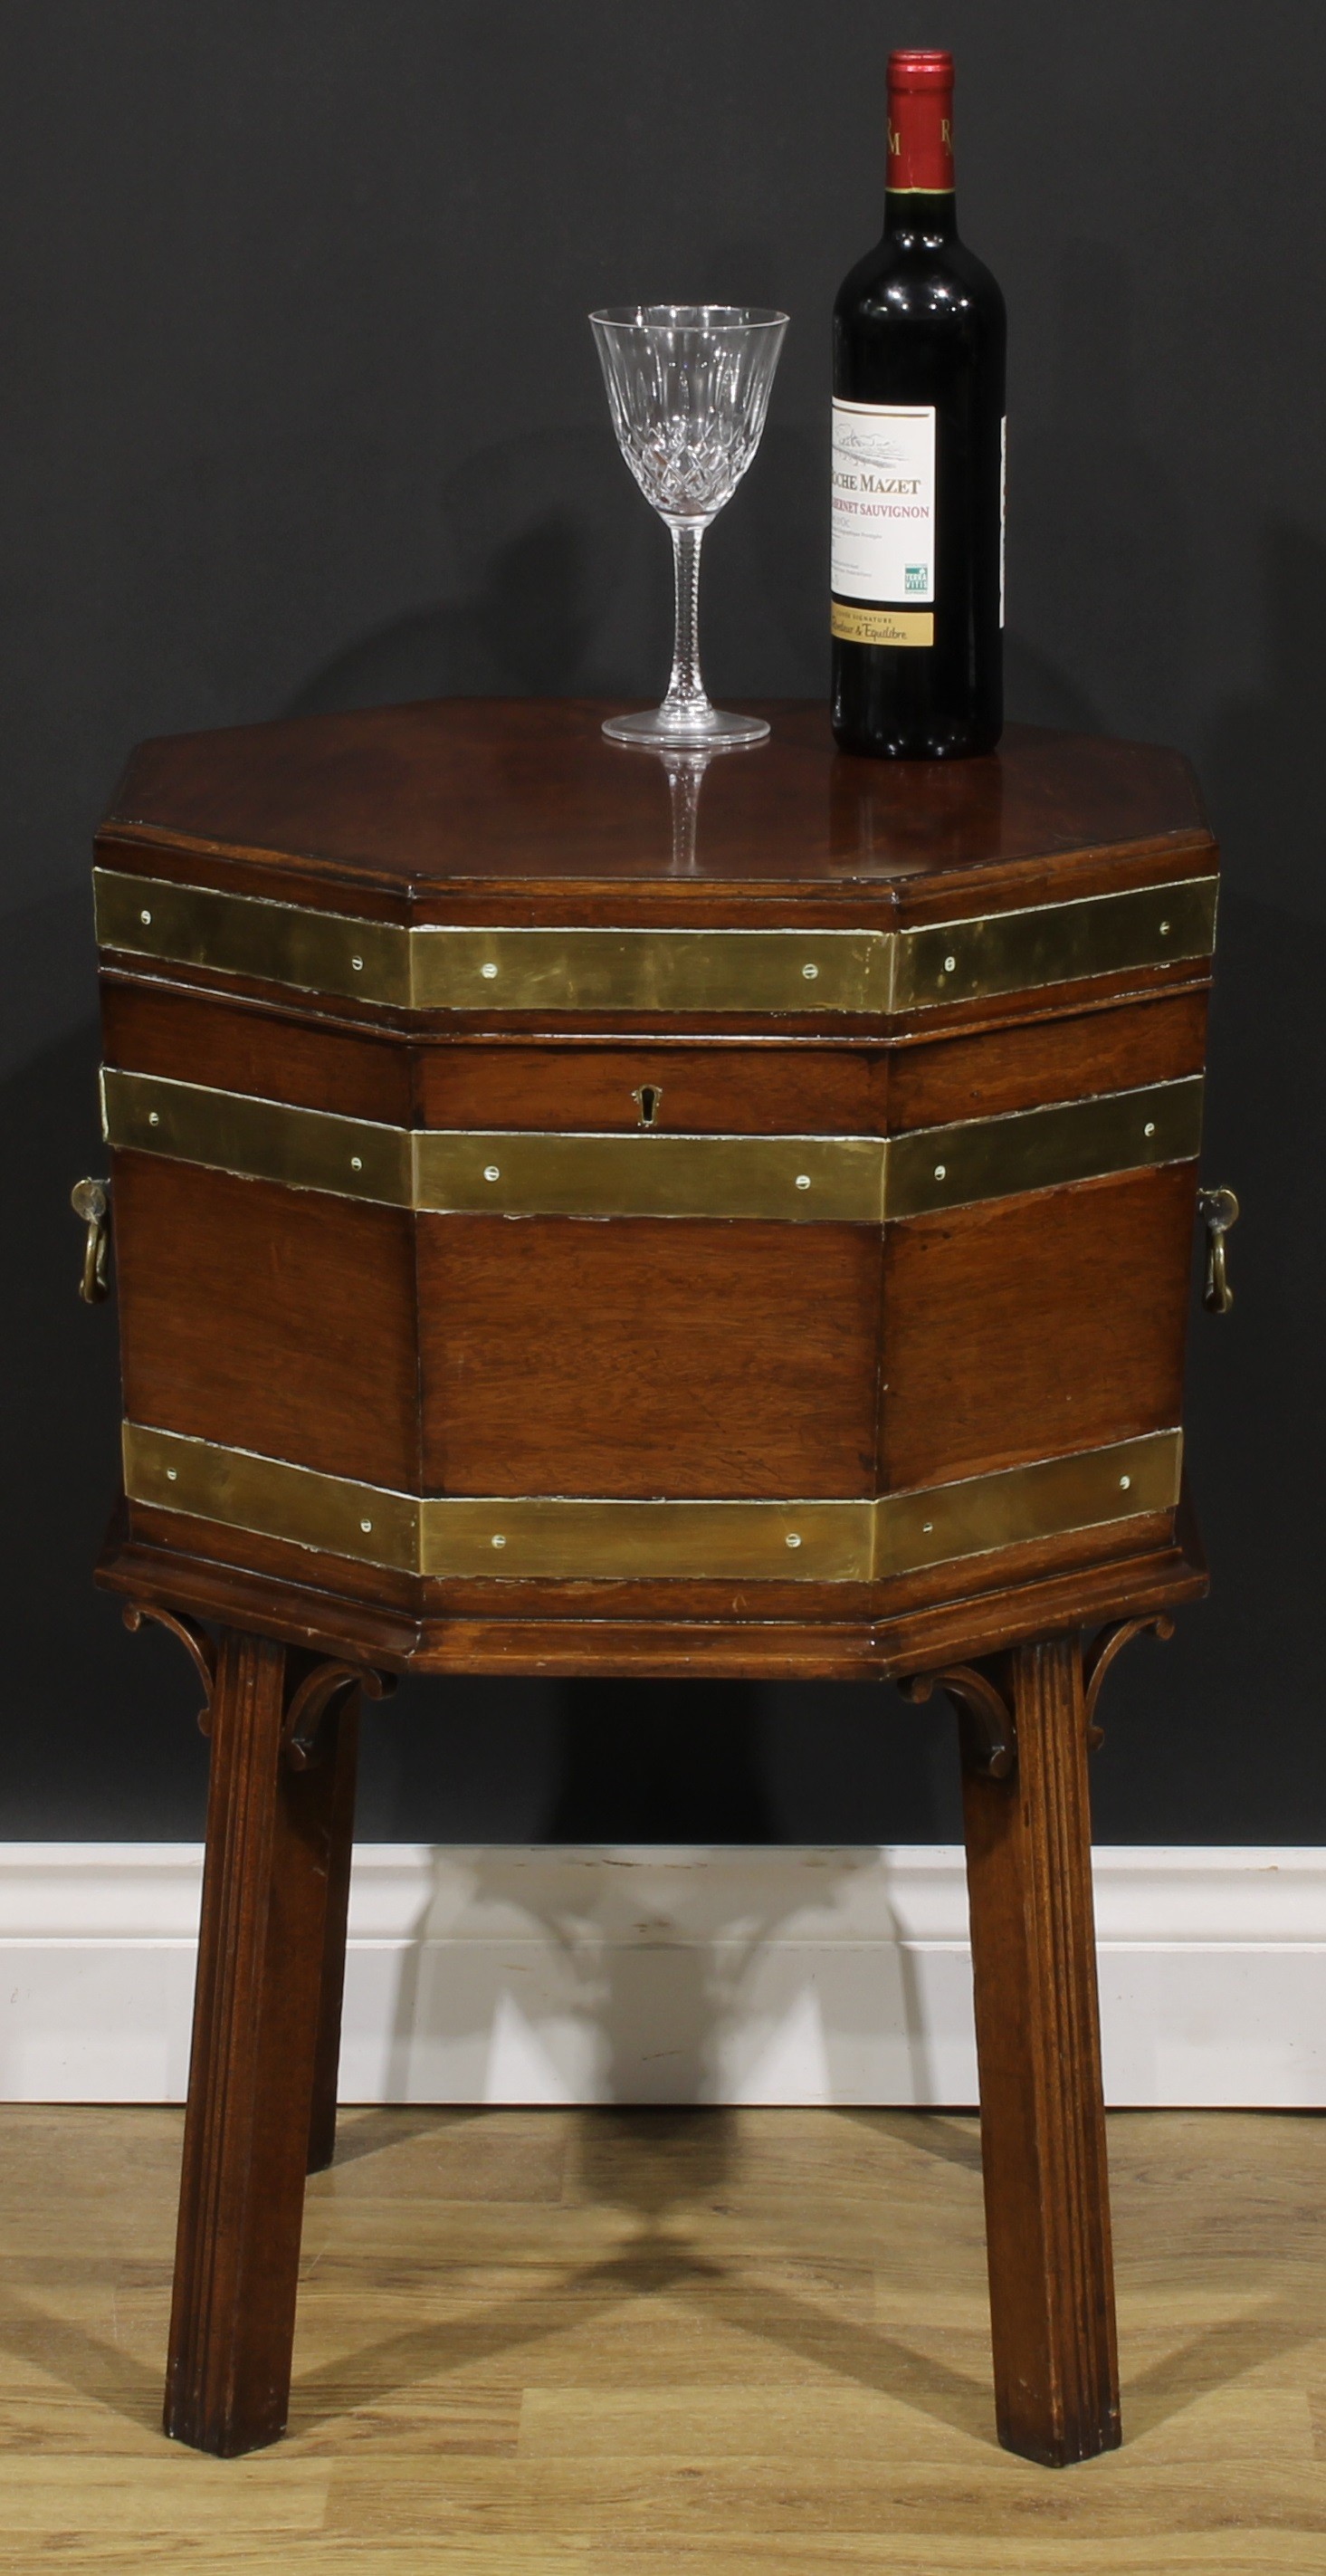 A George III Revival brass-bound mahogany octagonal cellarette or wine cooler, hinged top, removable